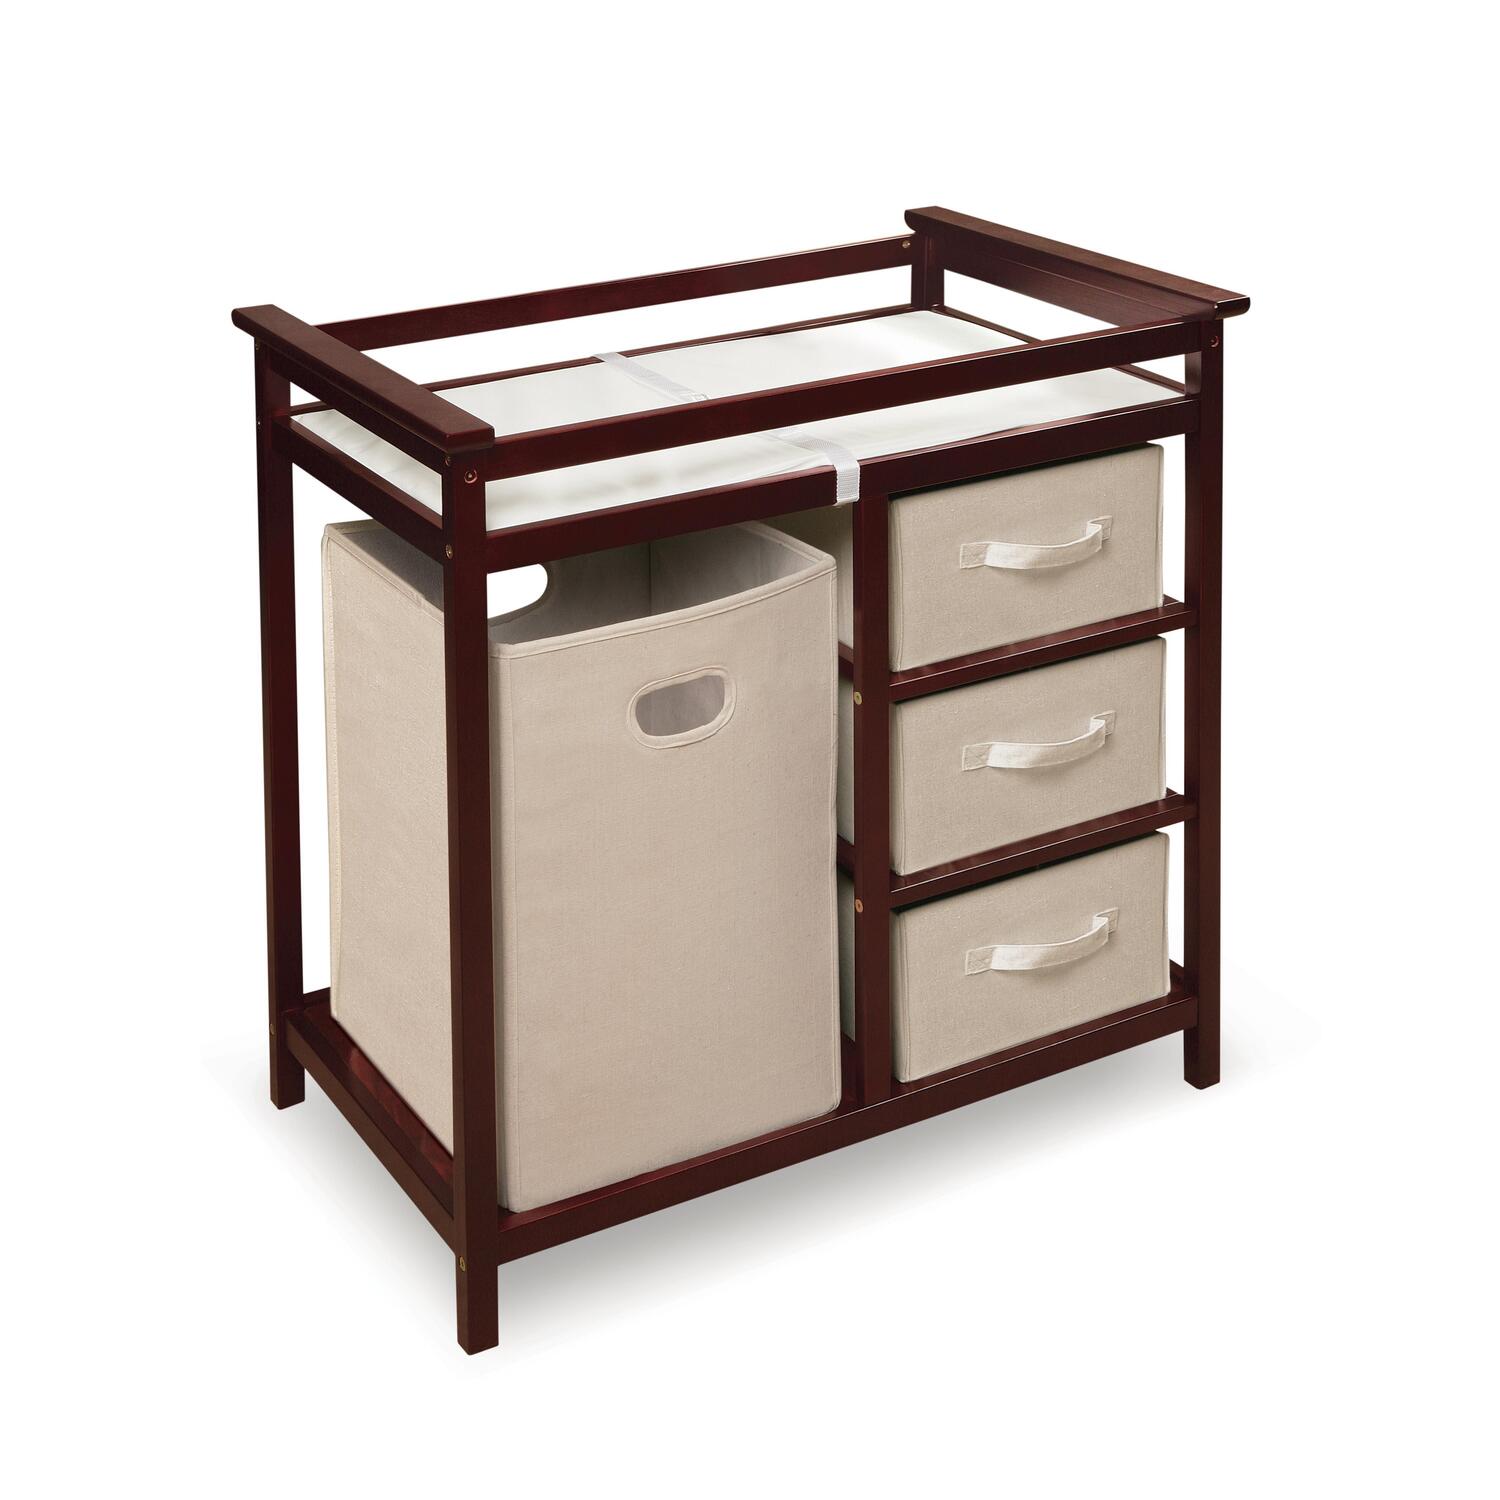 Badger Basket Modern Changing Table with Three Baskets & Hamper-Finish:Cherry - image 1 of 7